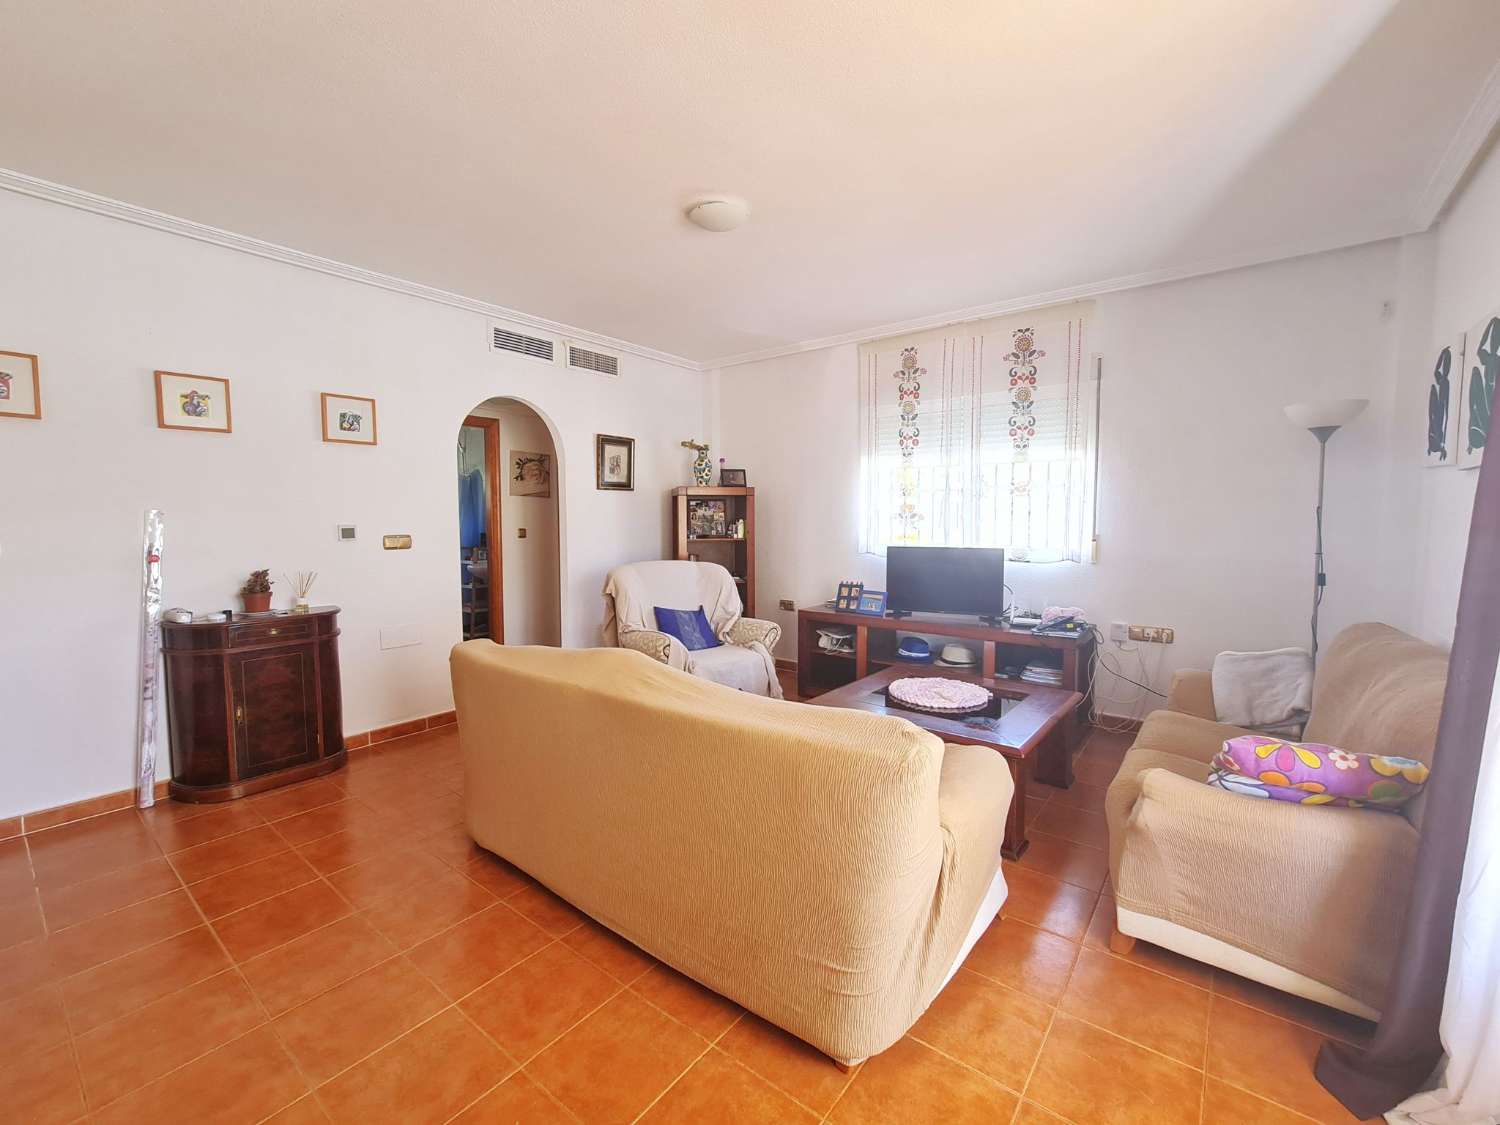 Detached Villa with Separate Apartment and Private Pool in La Zenia